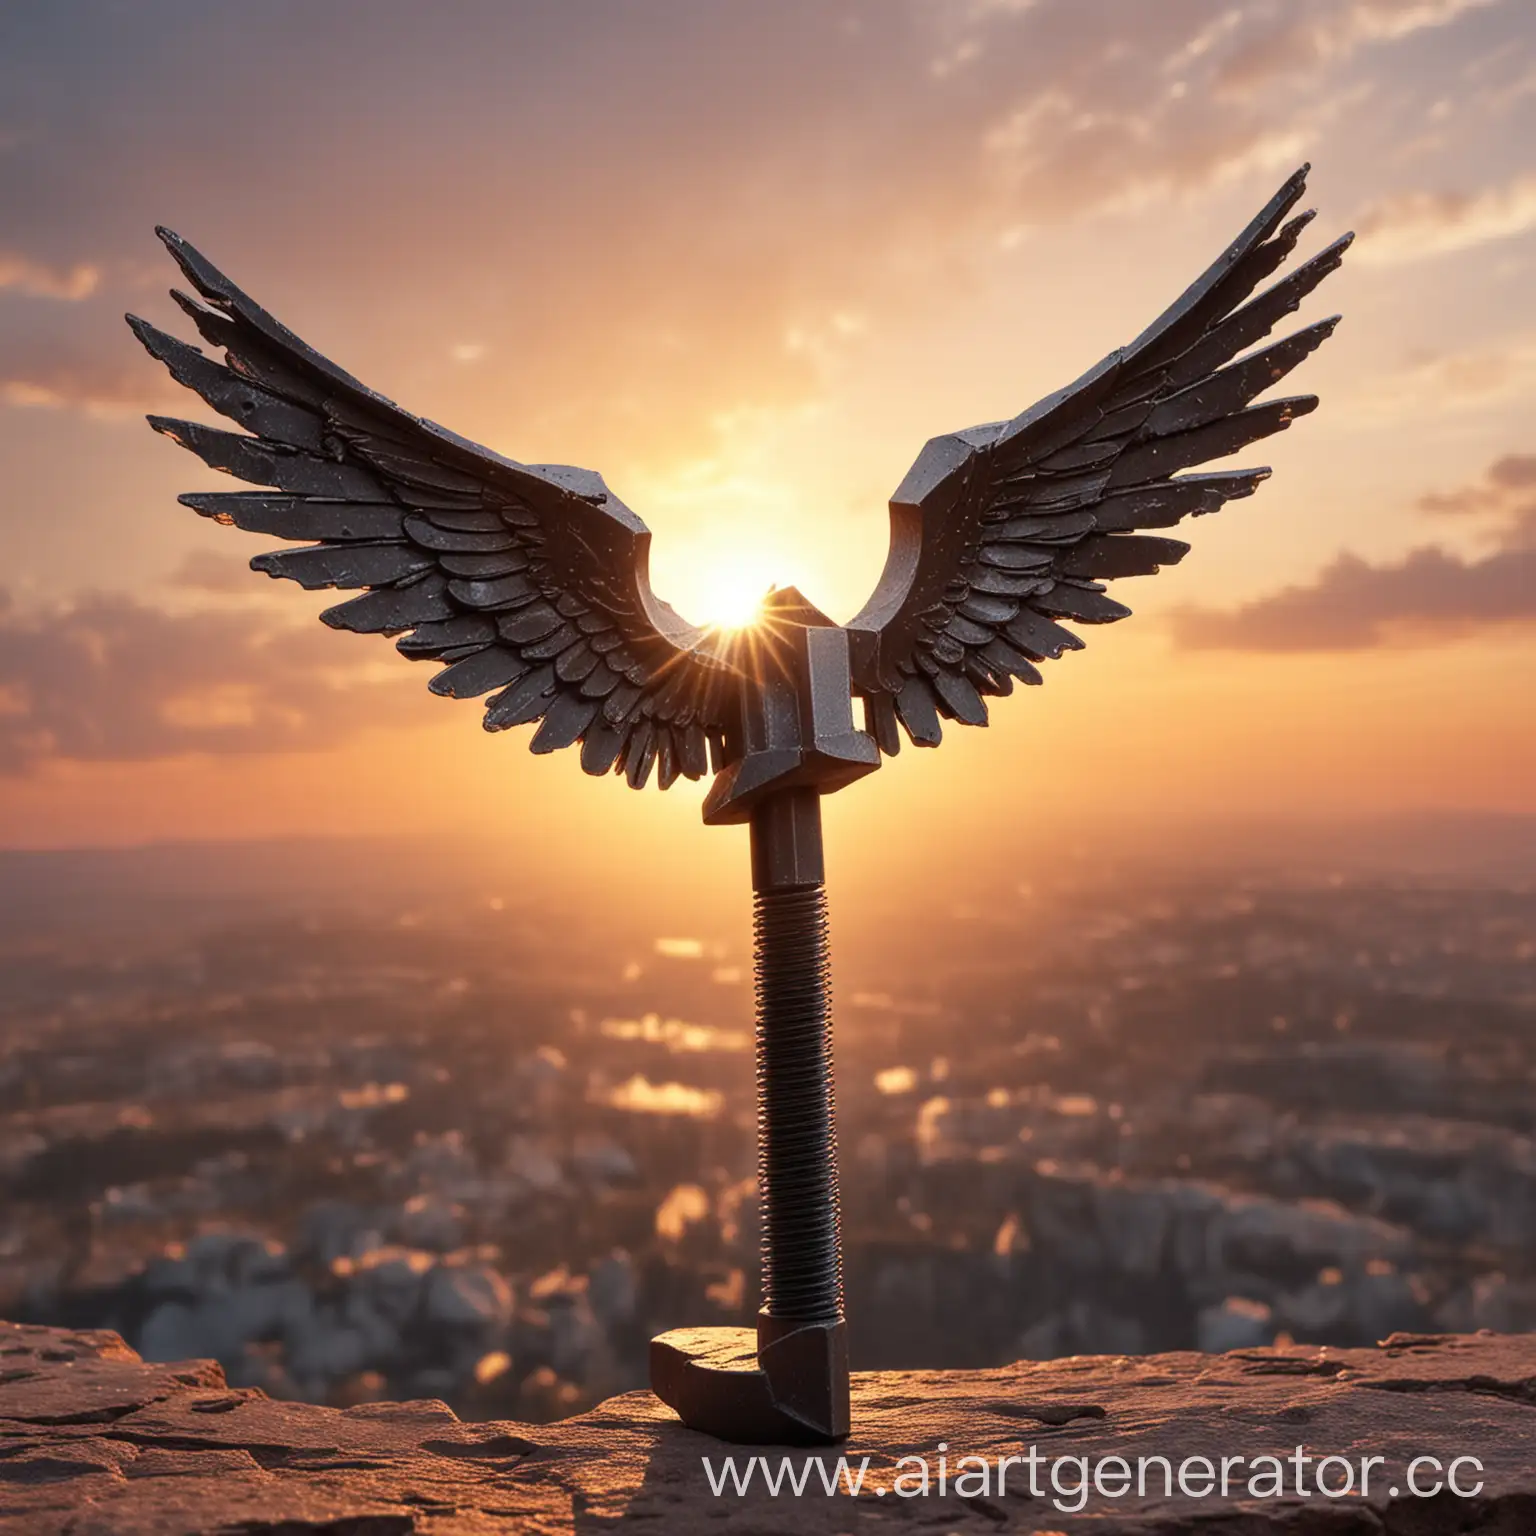 Iron-Bolt-Flying-with-Membranous-Wings-at-Sunset